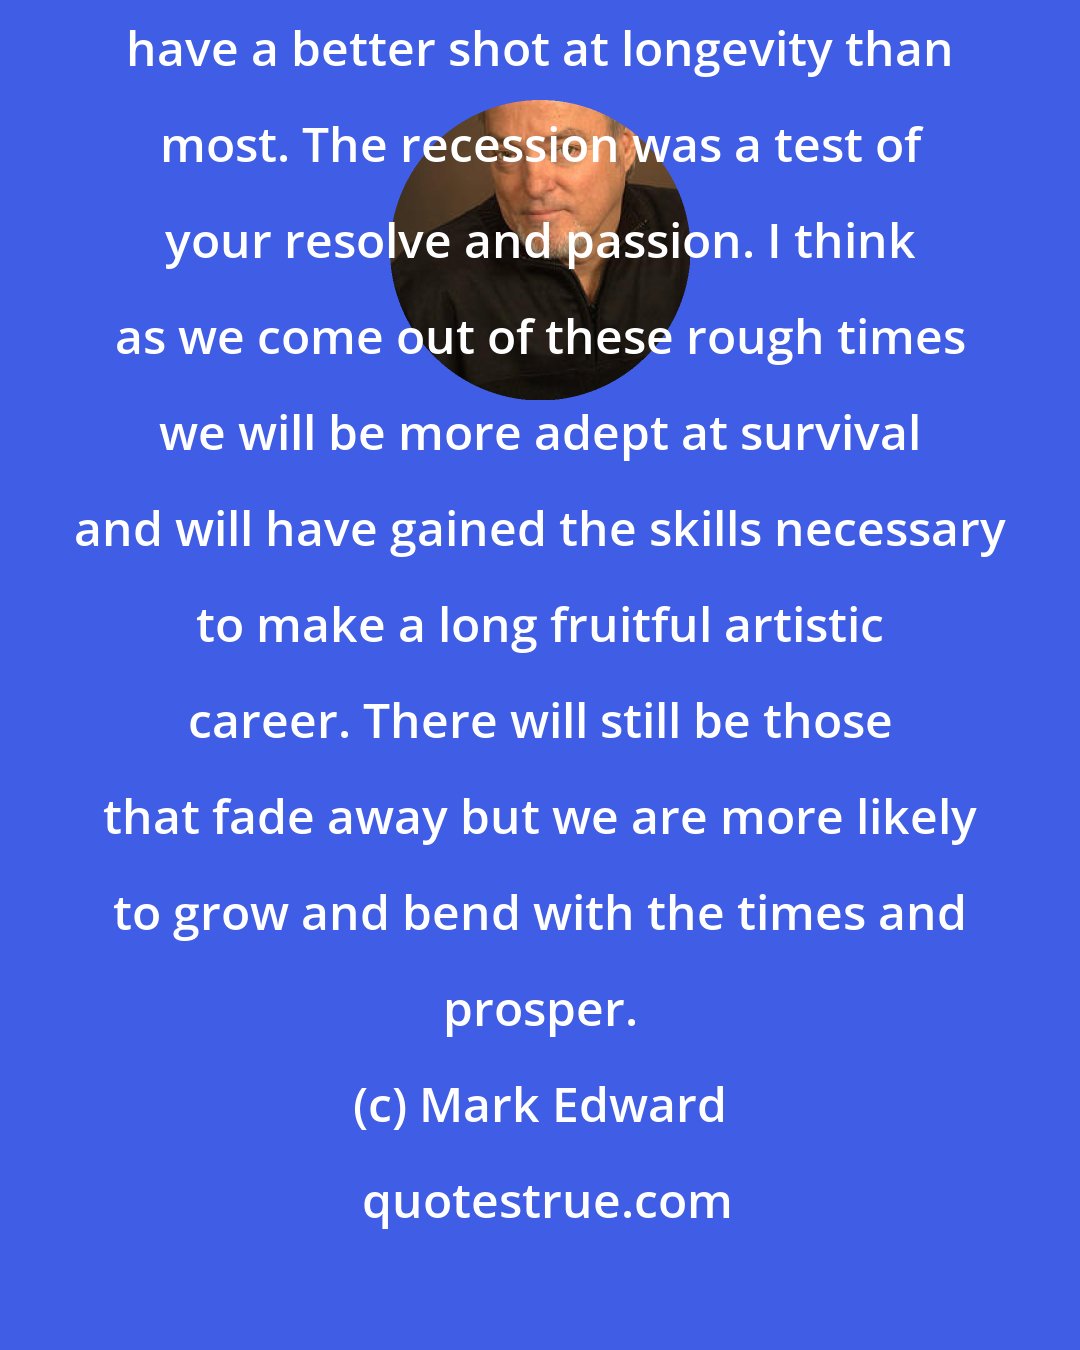 Mark Edward: I realized that the artists who managed to fight through this recession have a better shot at longevity than most. The recession was a test of your resolve and passion. I think as we come out of these rough times we will be more adept at survival and will have gained the skills necessary to make a long fruitful artistic career. There will still be those that fade away but we are more likely to grow and bend with the times and prosper.